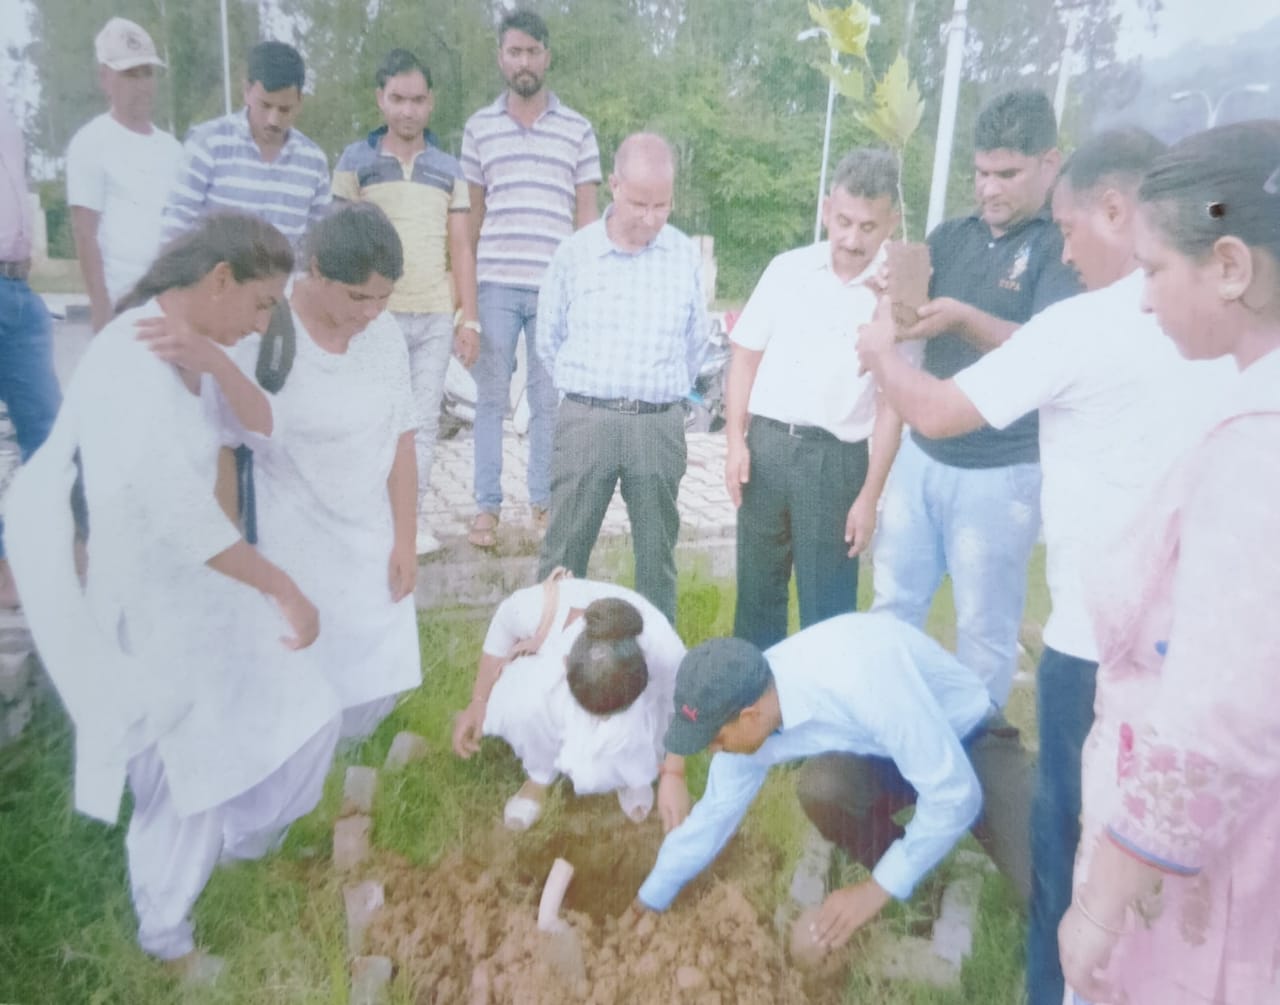 'Plantation Drive in the college'